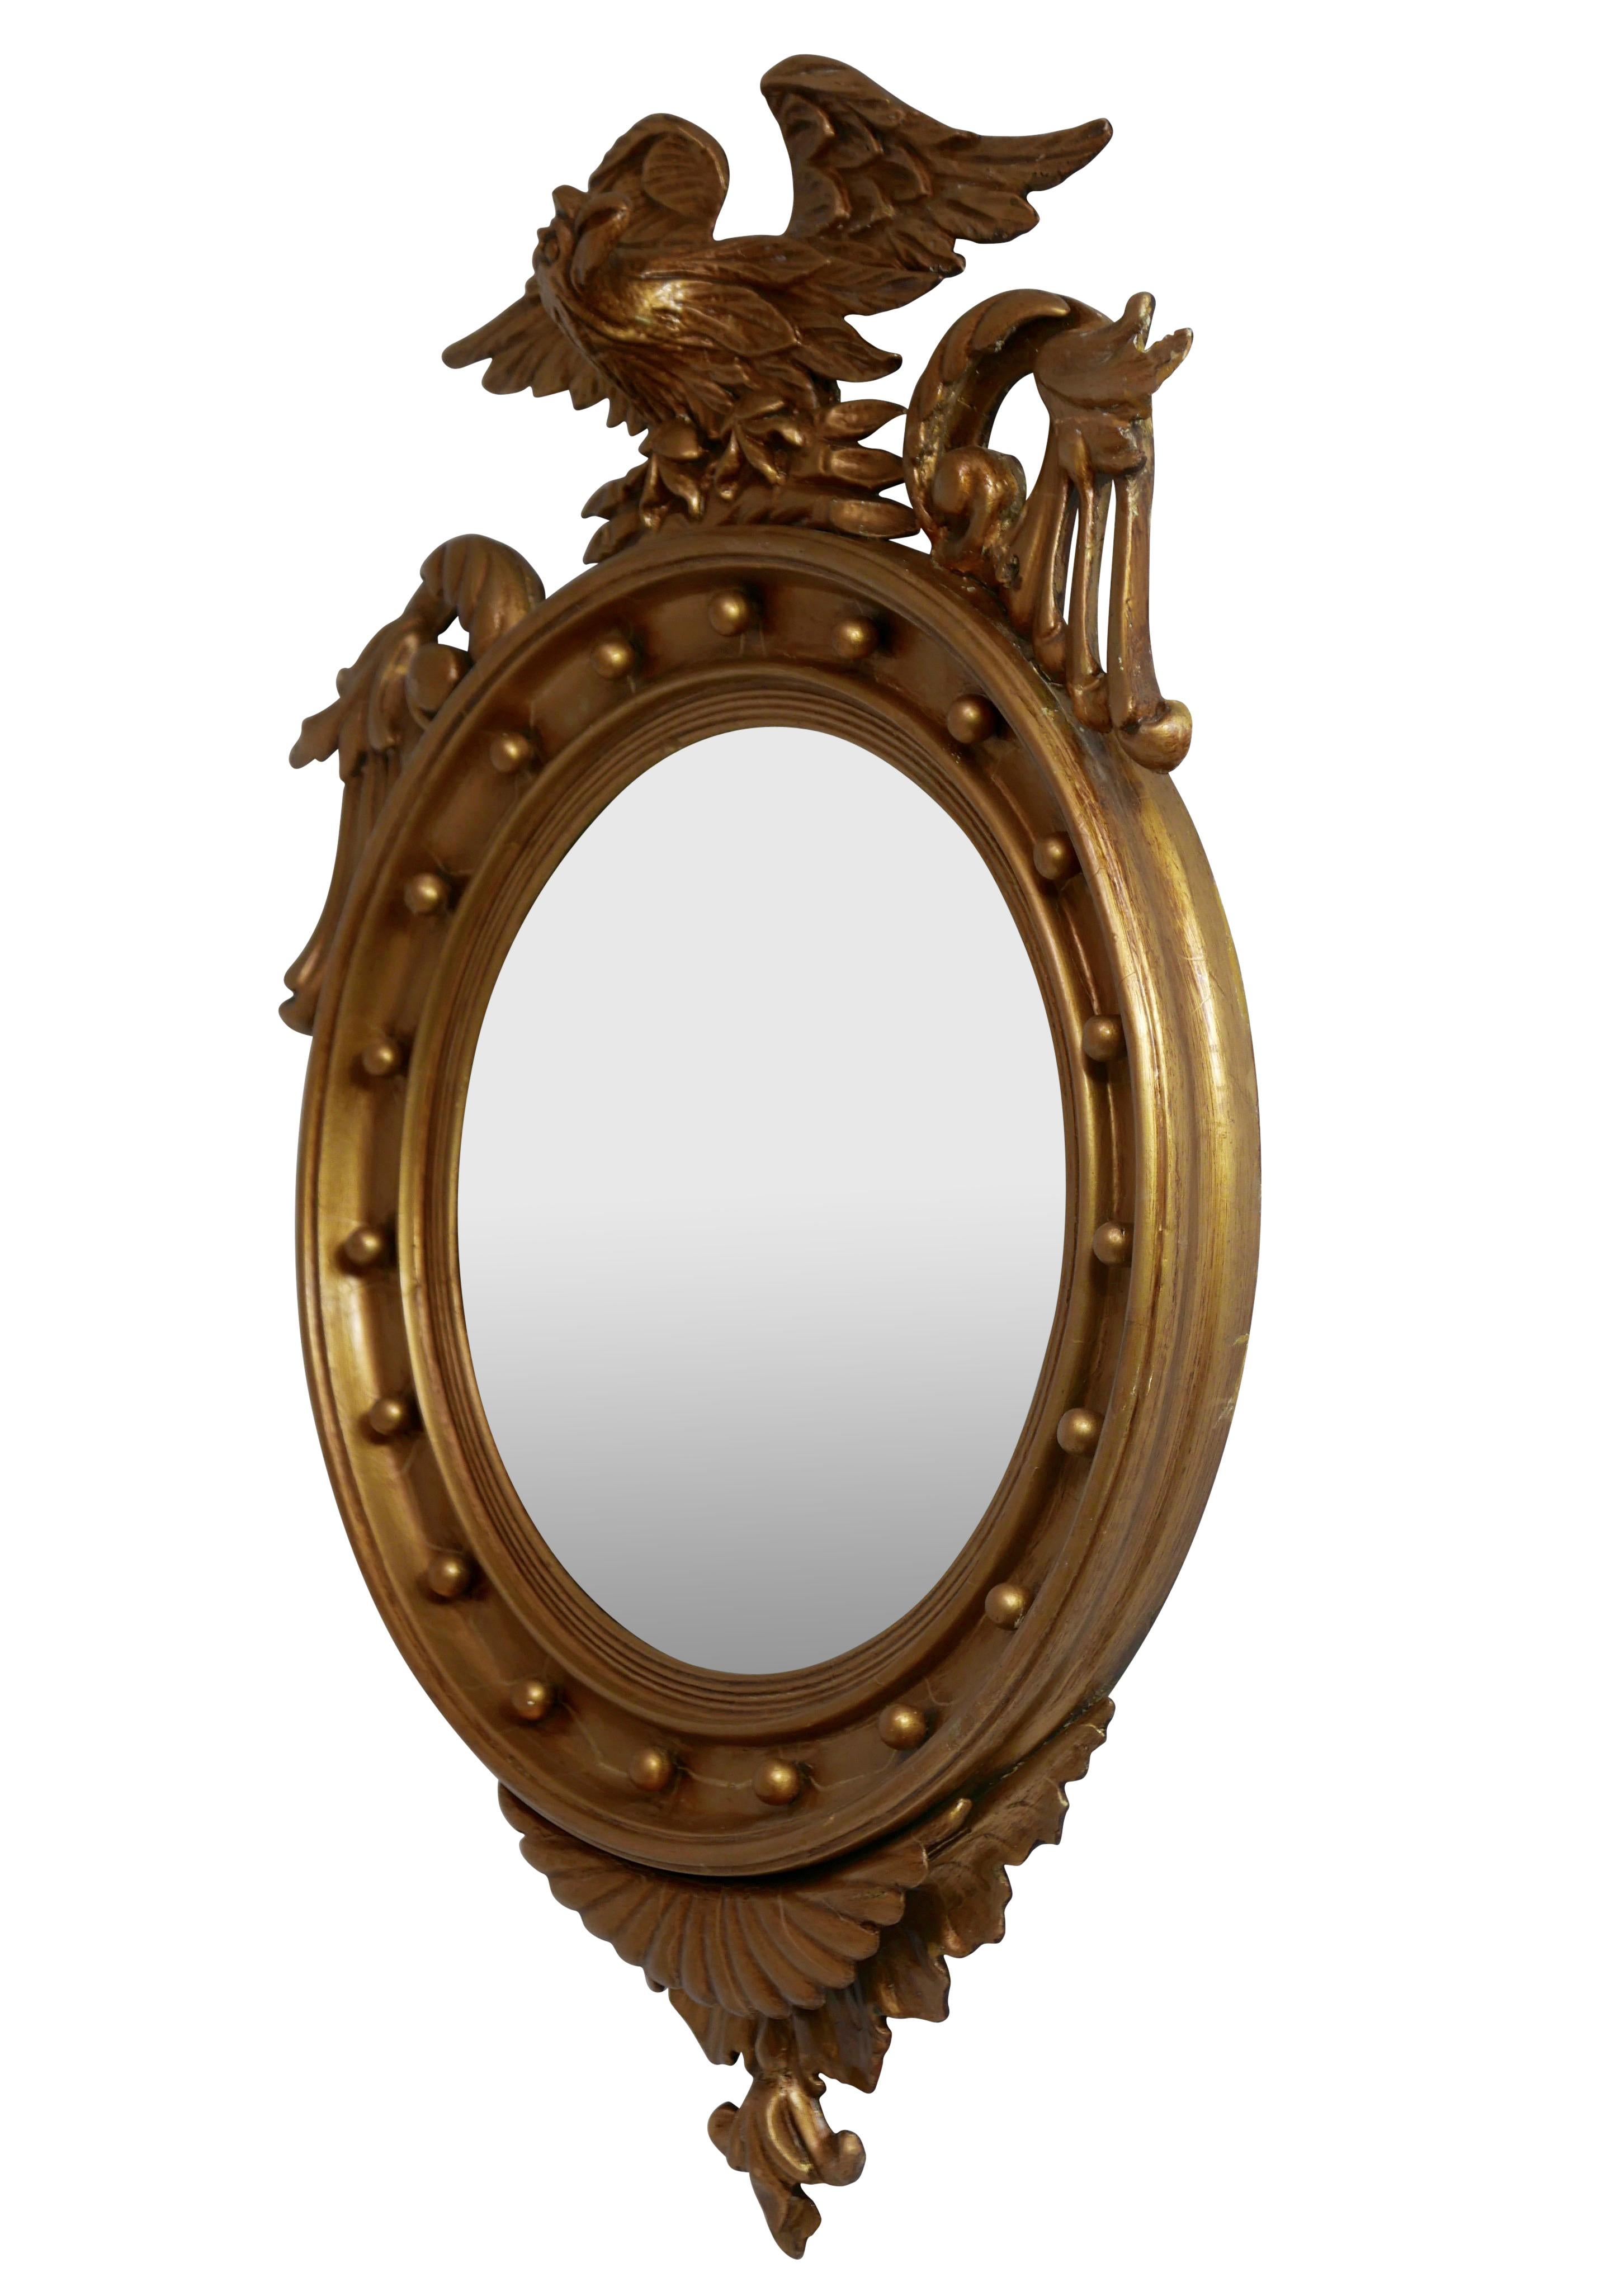 federal style mirrors